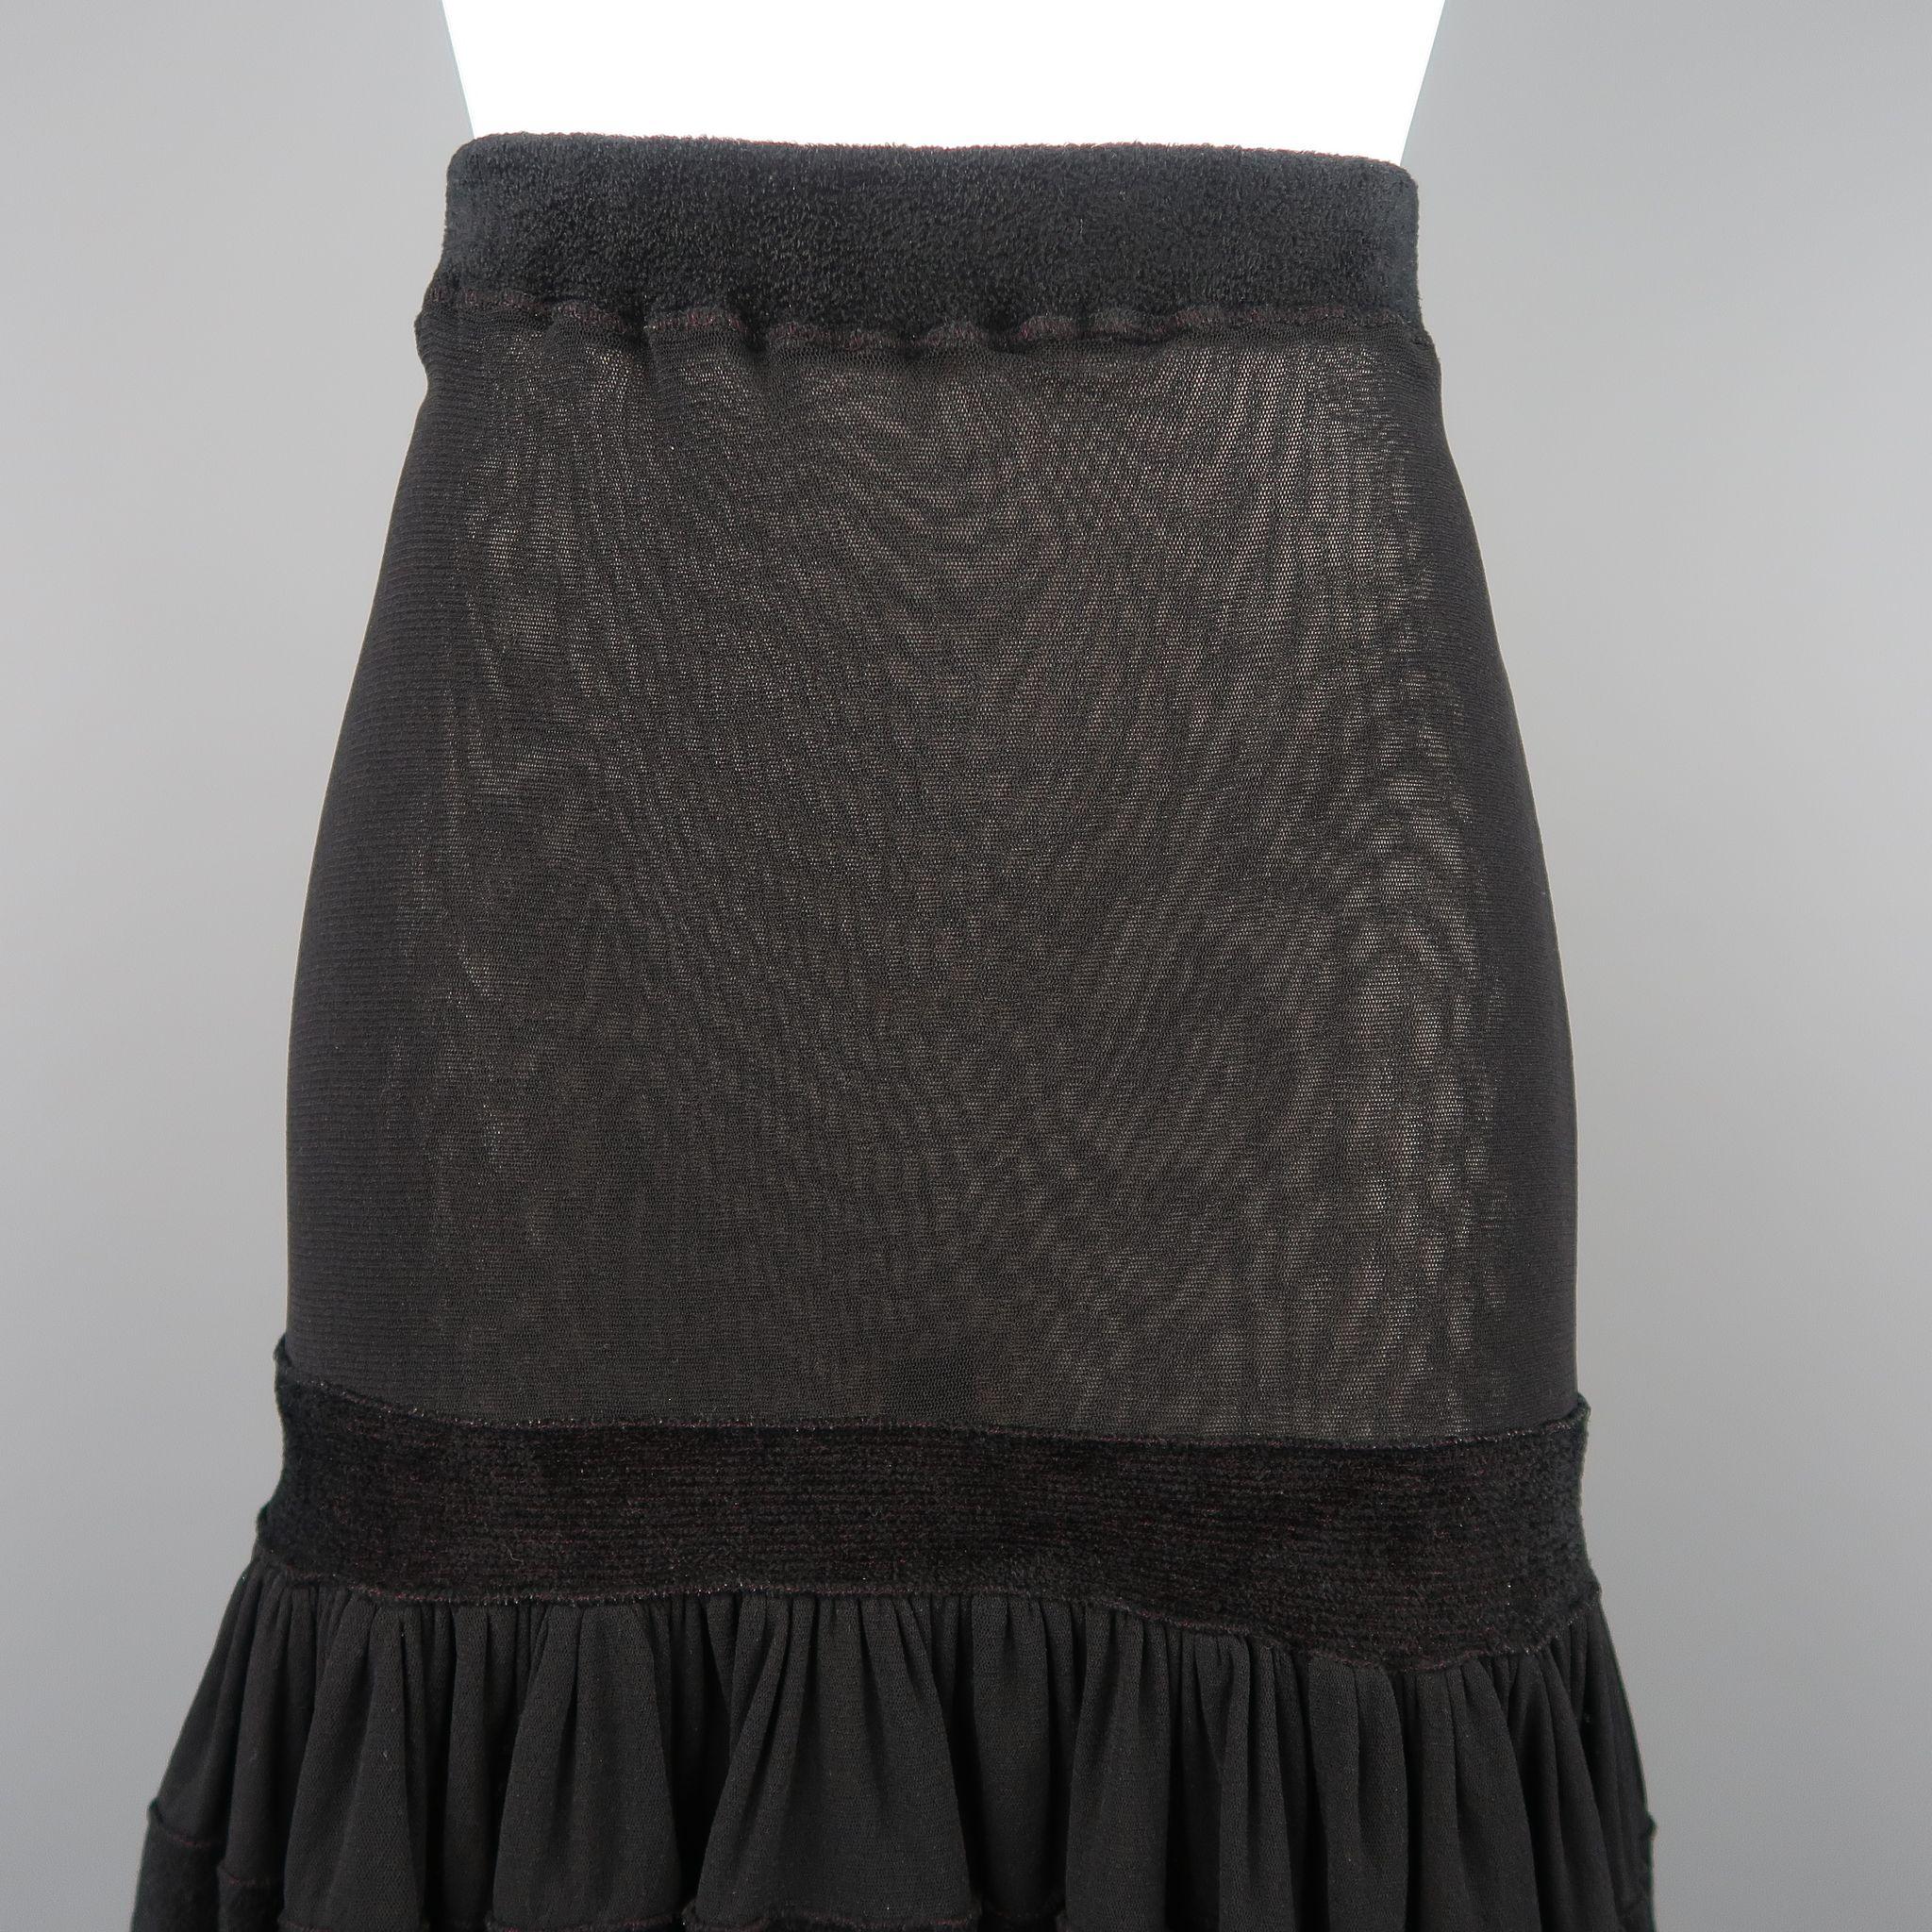 JEAN PAUL GAULTIER skirt comes in stretch micro mesh and features a fitted pencil top, drop waist, ruffle flair skirt, and thick velour trim. Made in Italy.
 
Good Pre-Owned Condition.
Marked: S

Measurements:

Waist: 23 in.
Hip: 32 in.
Length: 27